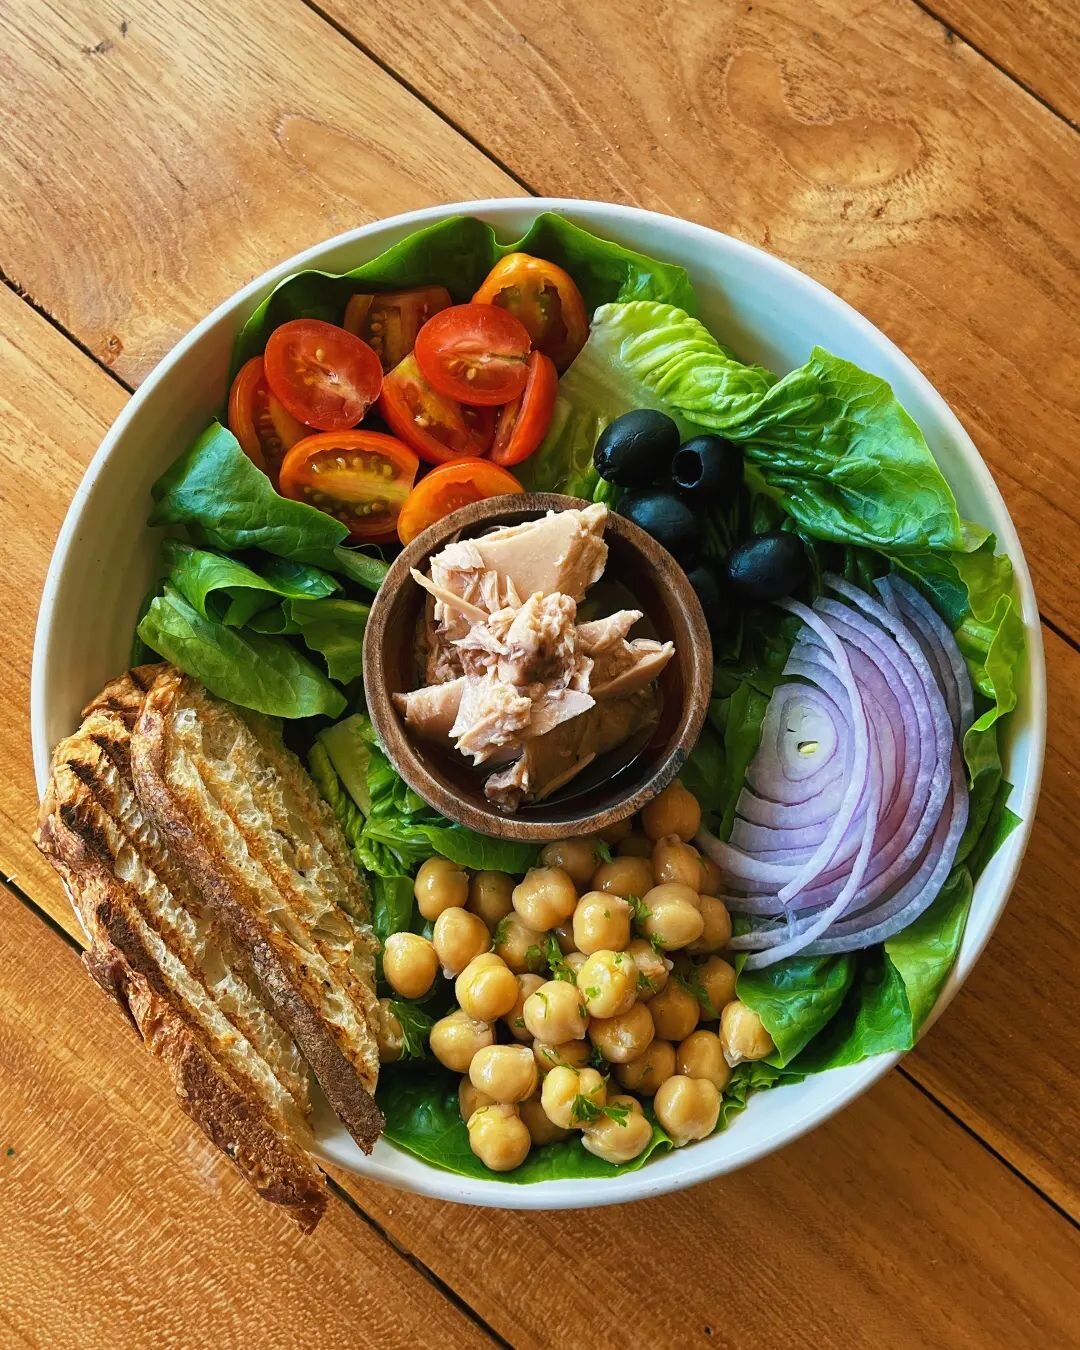 Did you try our salad? 
Packed with proteins and healthy nutrients 🤩 such as tuna, chickpea, black olives, fresh cherry tomatoes and raw red onions over a bed of lettuce. A simple side dressing of olive oil, lemon and mustard complement this mediter